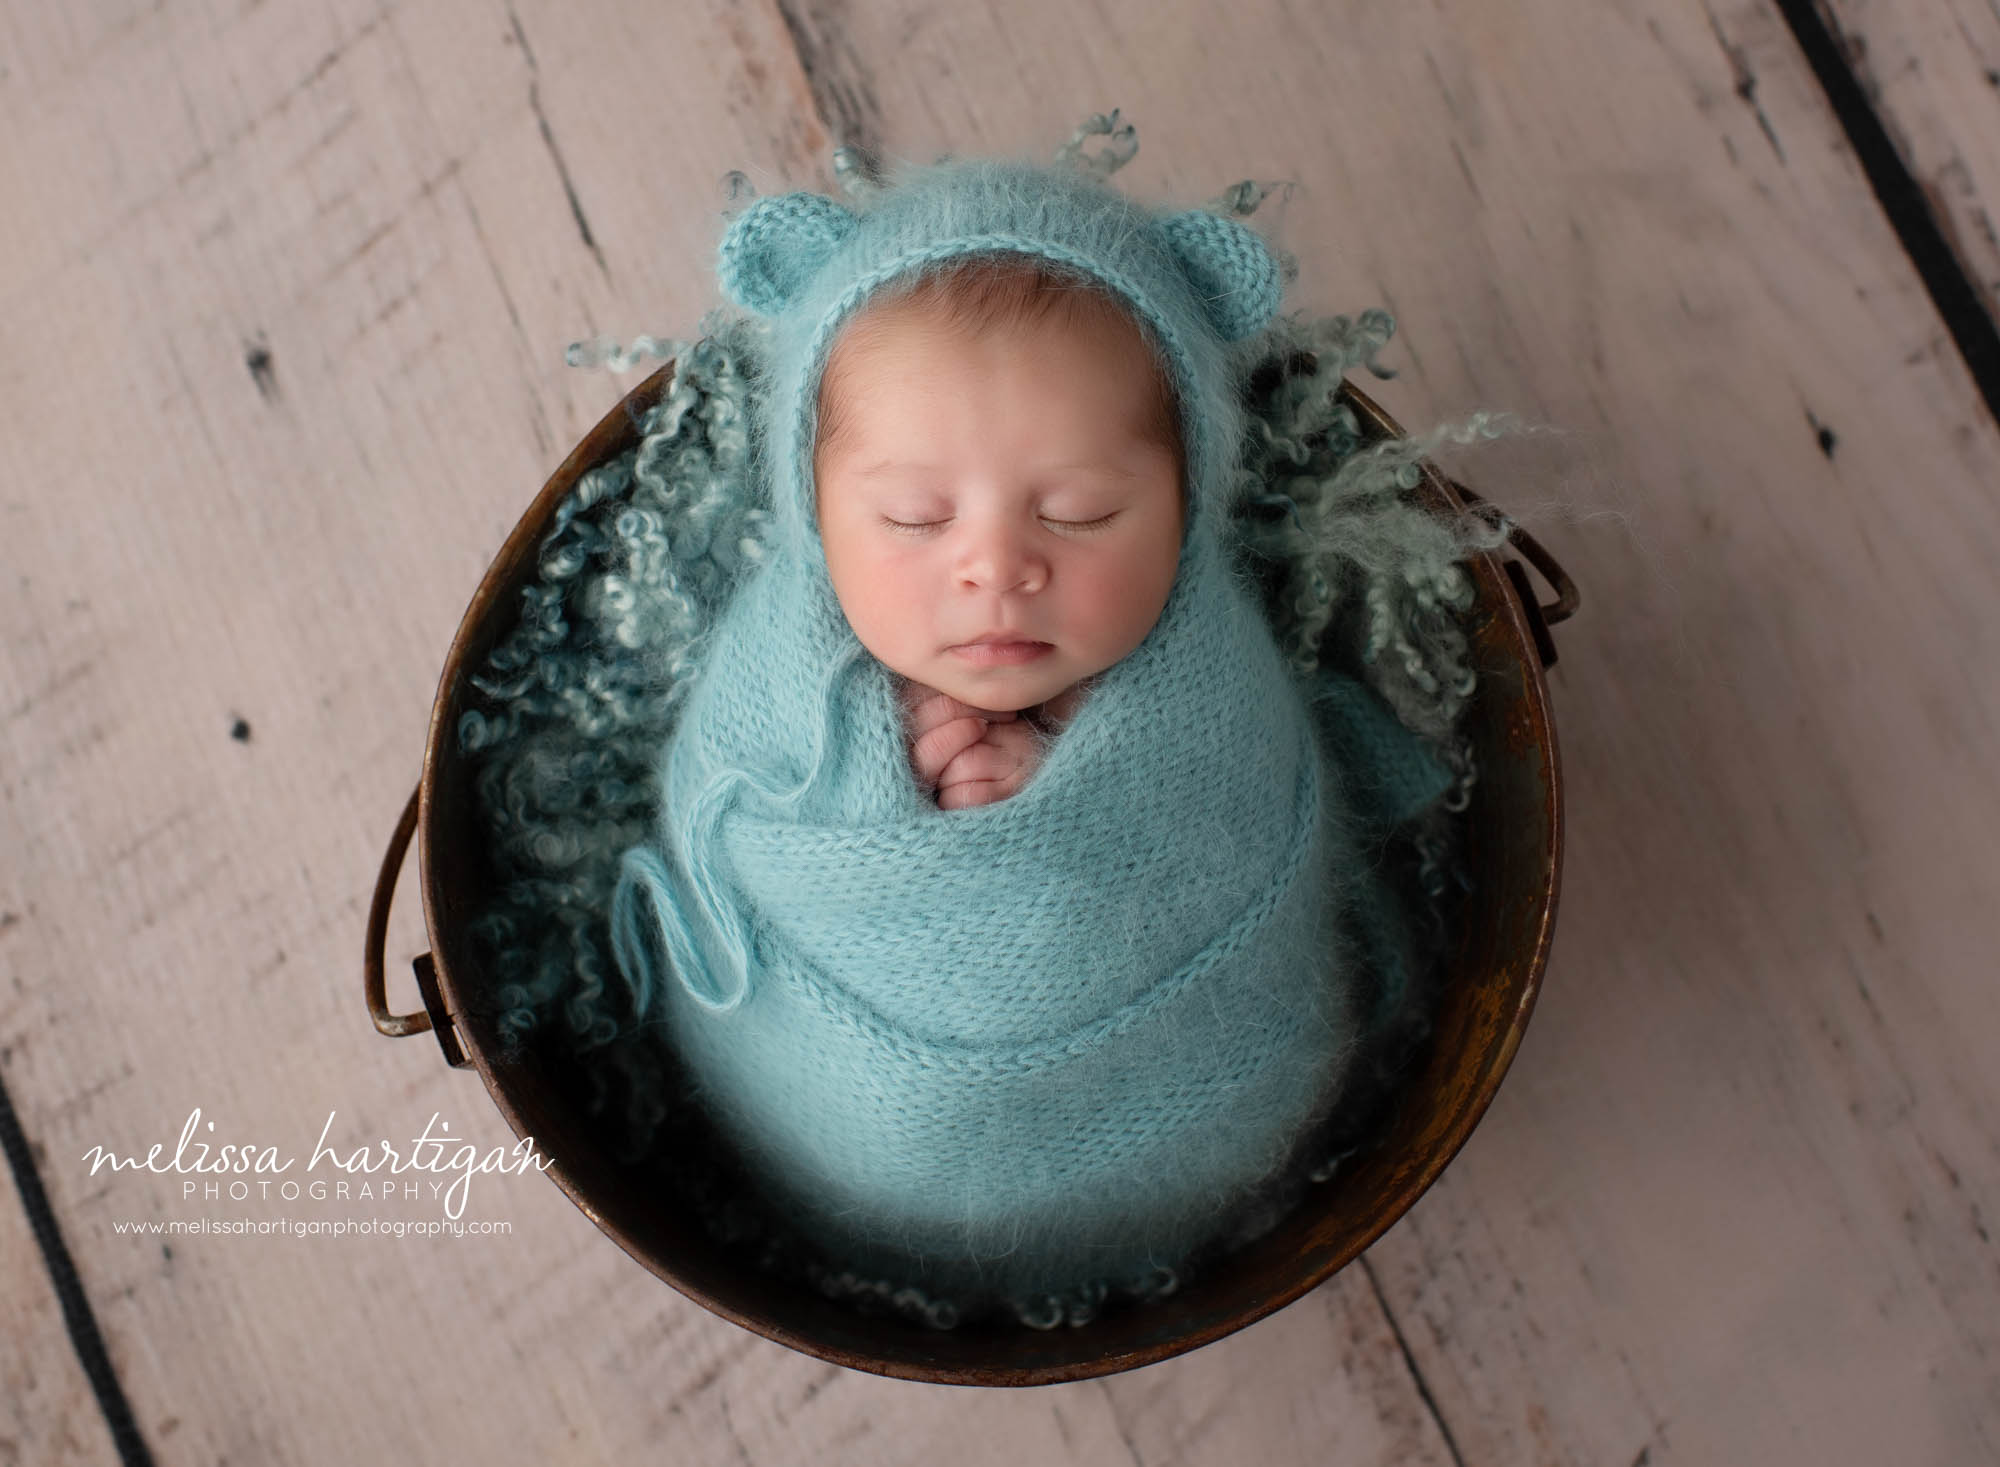 Newborn baby boy wrapped in teal colored knitted wrap with matching bear bonnet posed in bucket Newborn Photographer CT